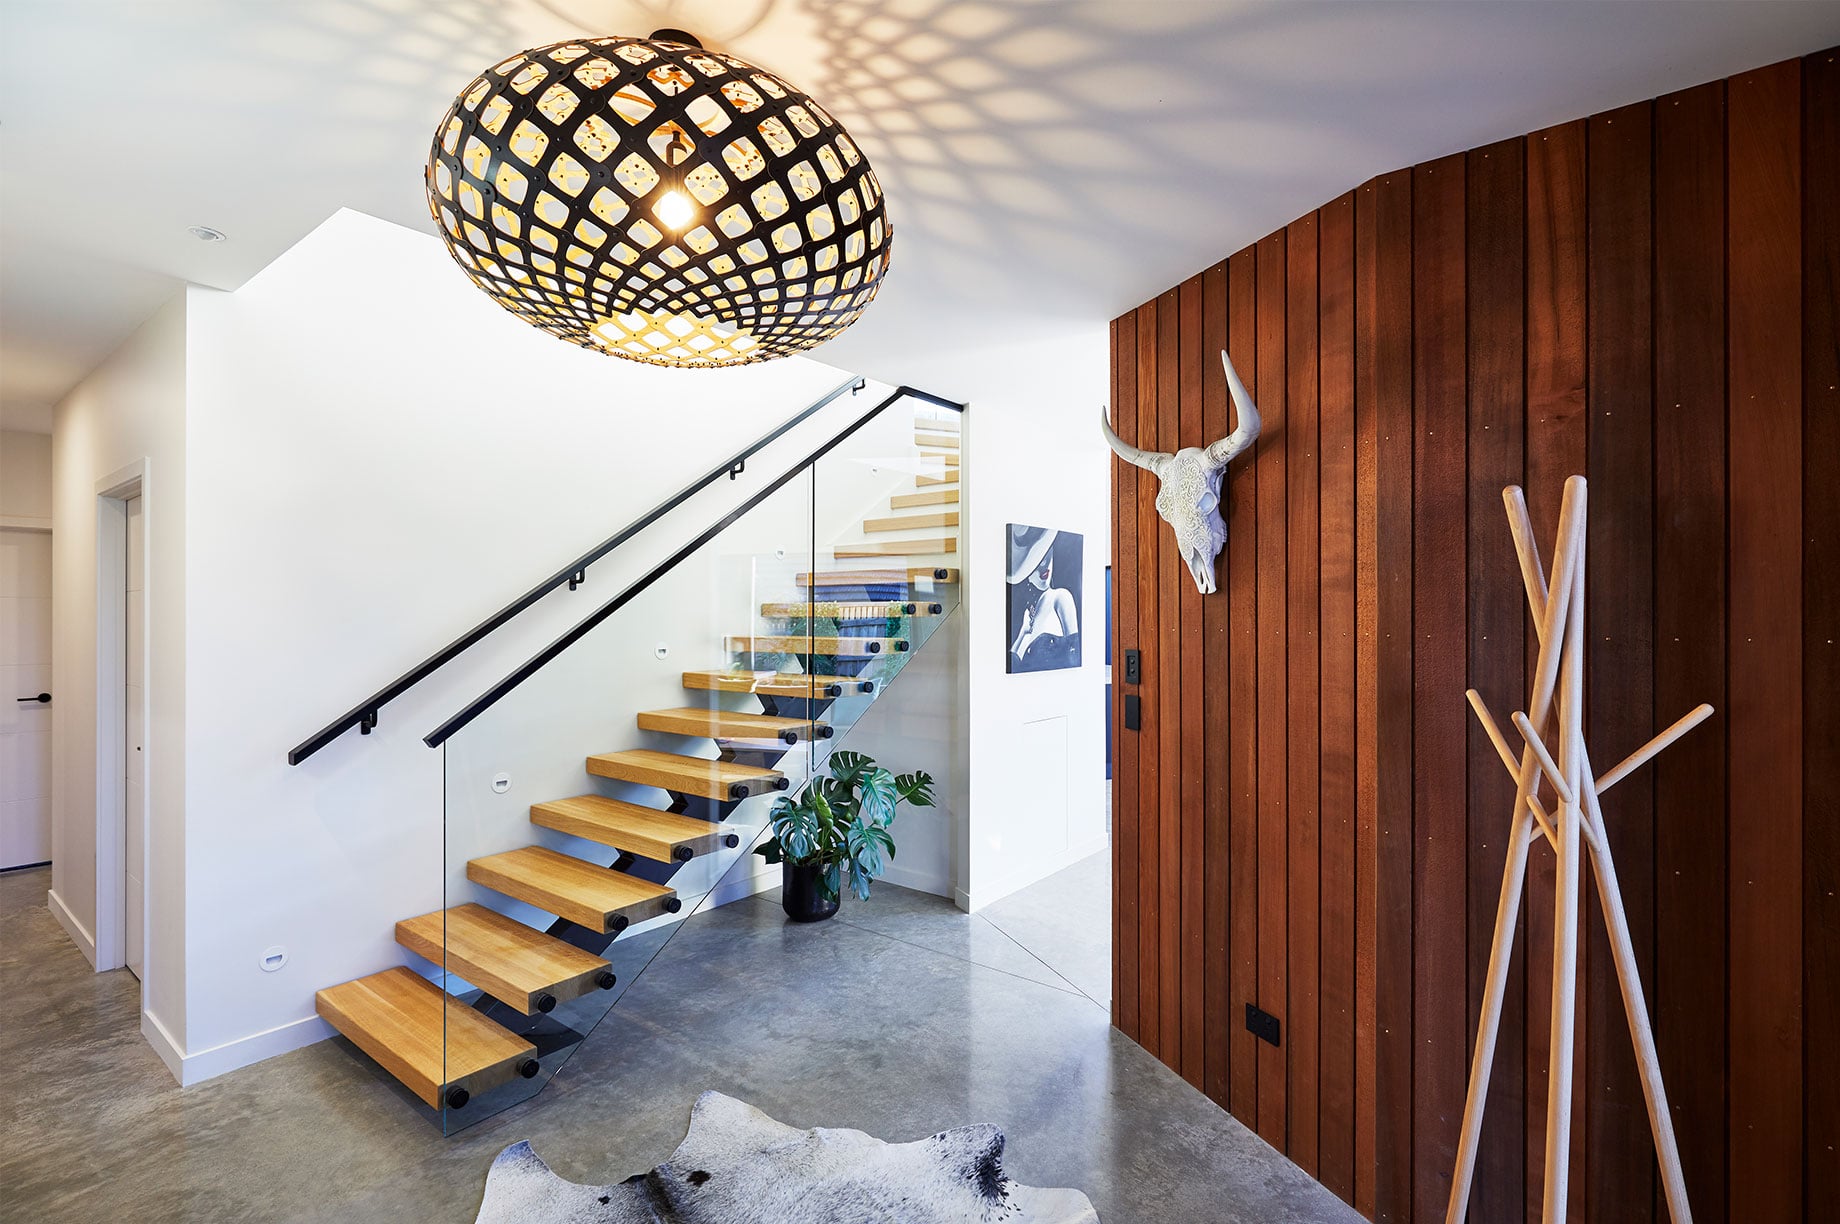 Wooden internal staircase